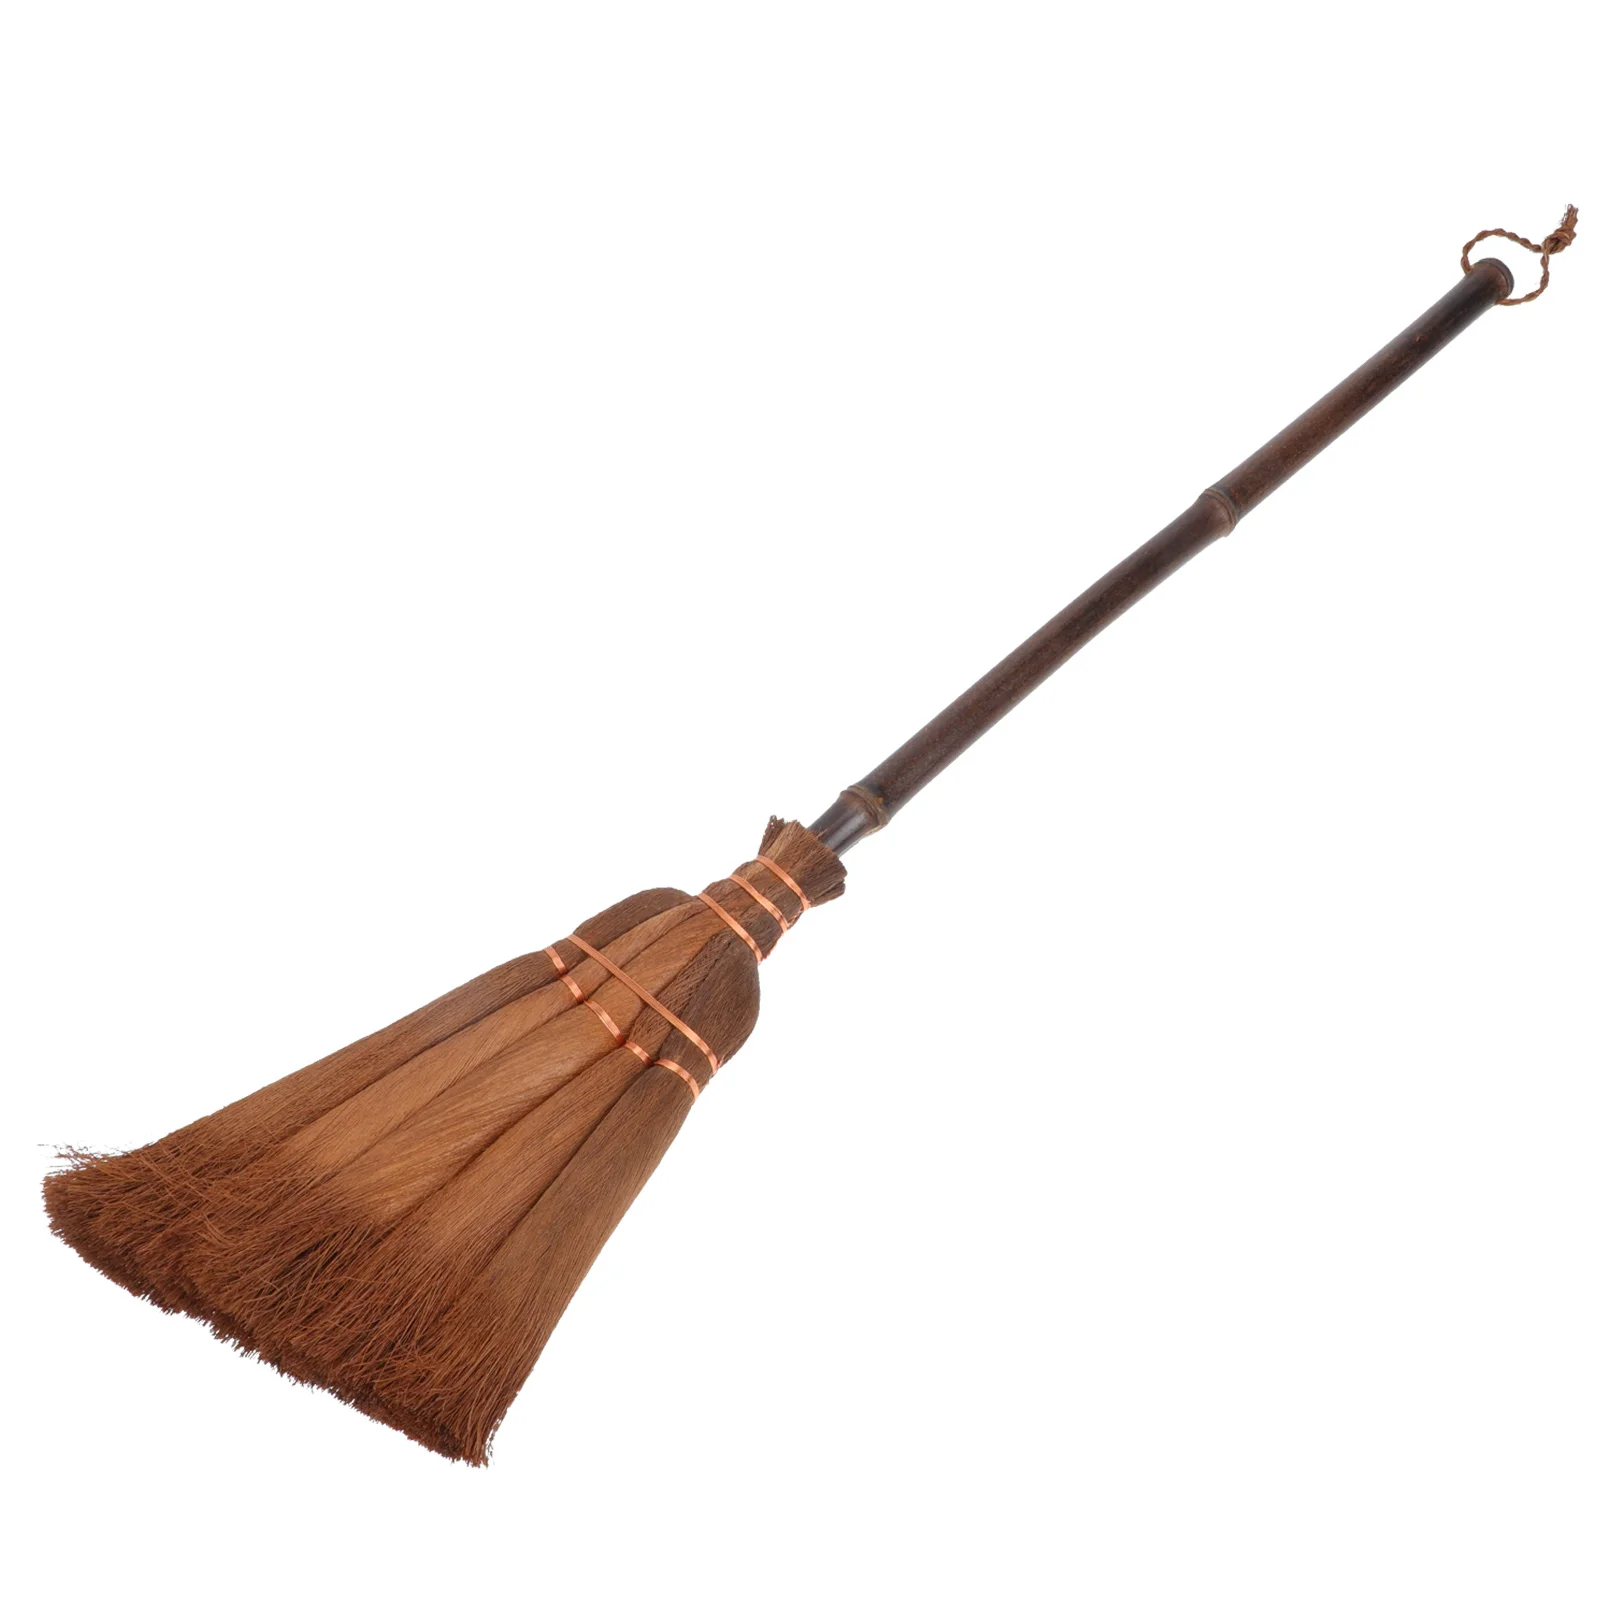 

Broom Cleaning Sweeping Kids Broomscorn Natural Brush Strawhandle Hand Tool Outdoor Broomstickvintage Soft Indoor Sweeperkitchen